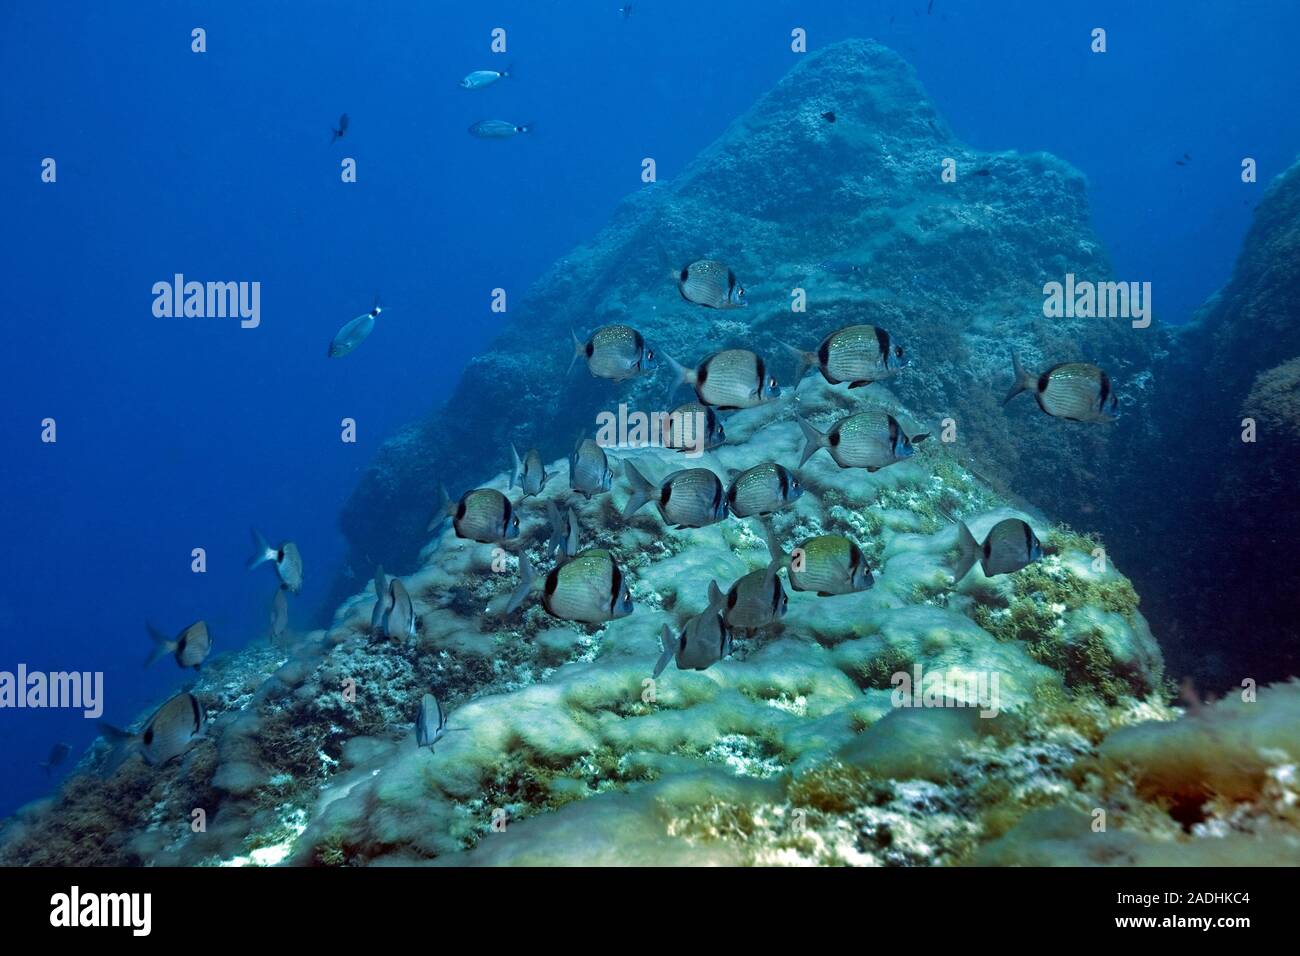 Two-banded breams (Diplodus vulgaris), swimming over rocky reef covered with algae, marine park Dragonera, Sant Elm, Mallorca, Balearic islands, Spain Stock Photo